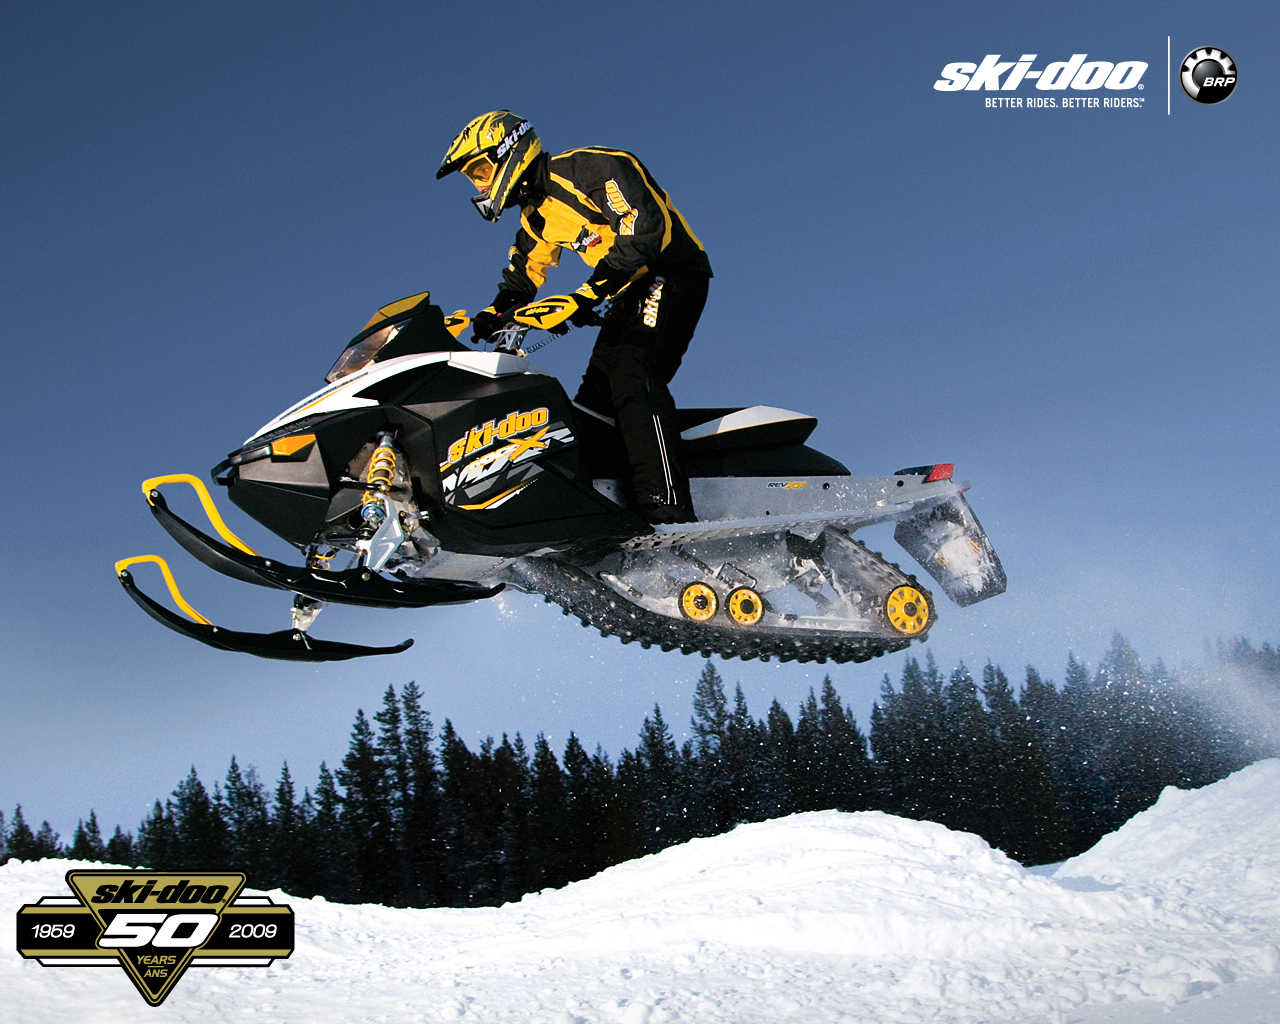 ... Bombardier Ski-Doo MX Z-REV snowmobile is featured in the new James Bond